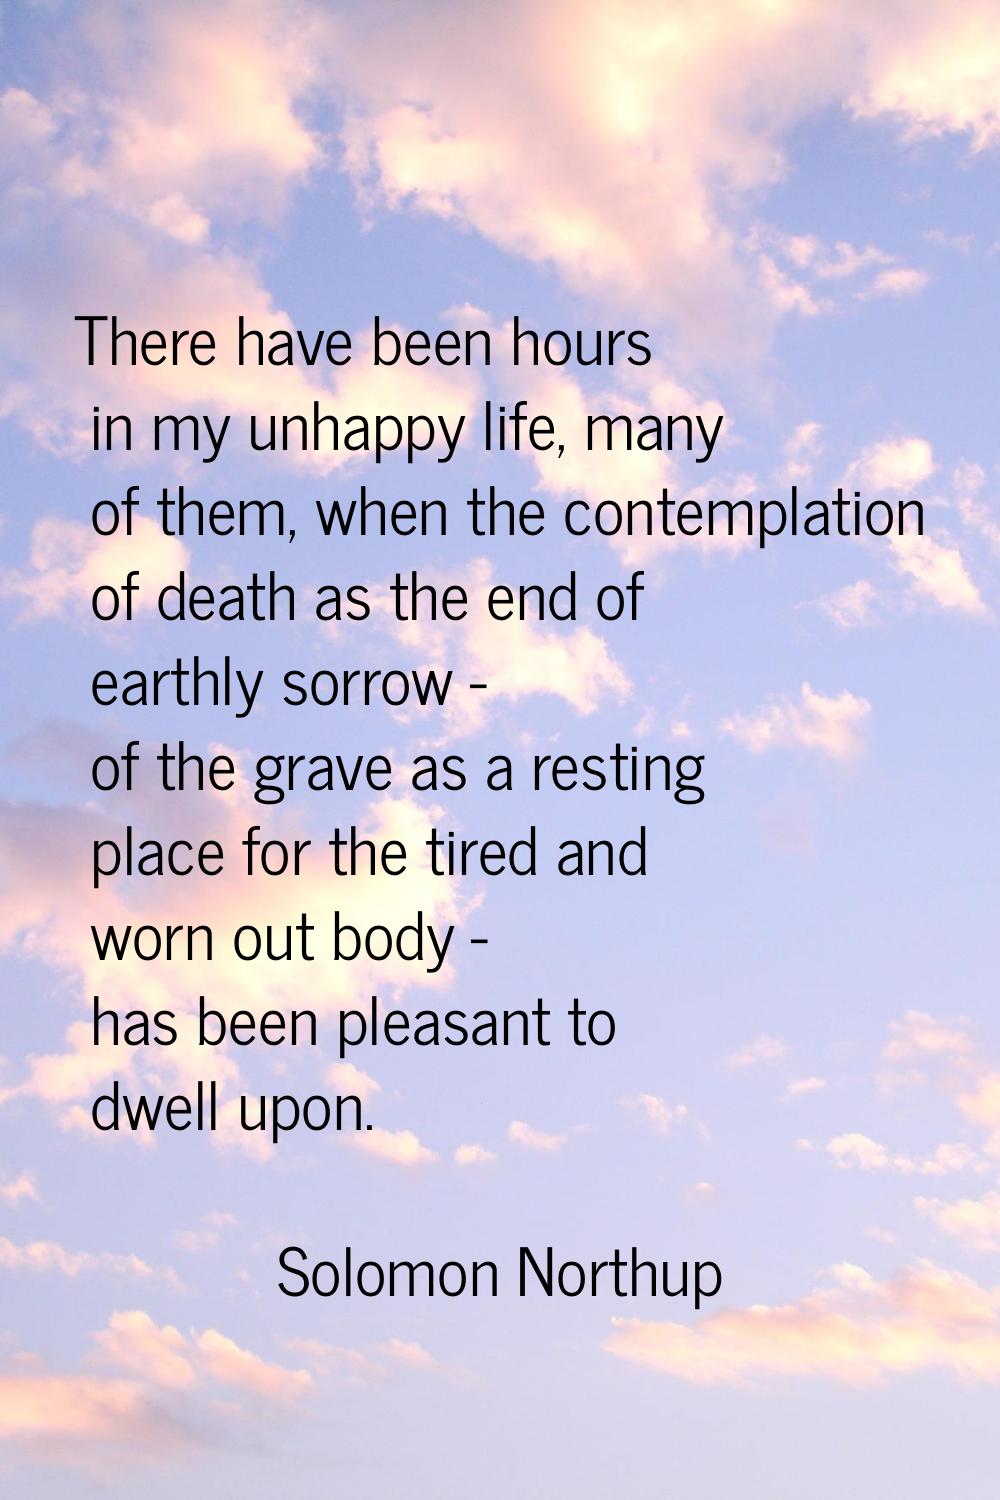 There have been hours in my unhappy life, many of them, when the contemplation of death as the end 